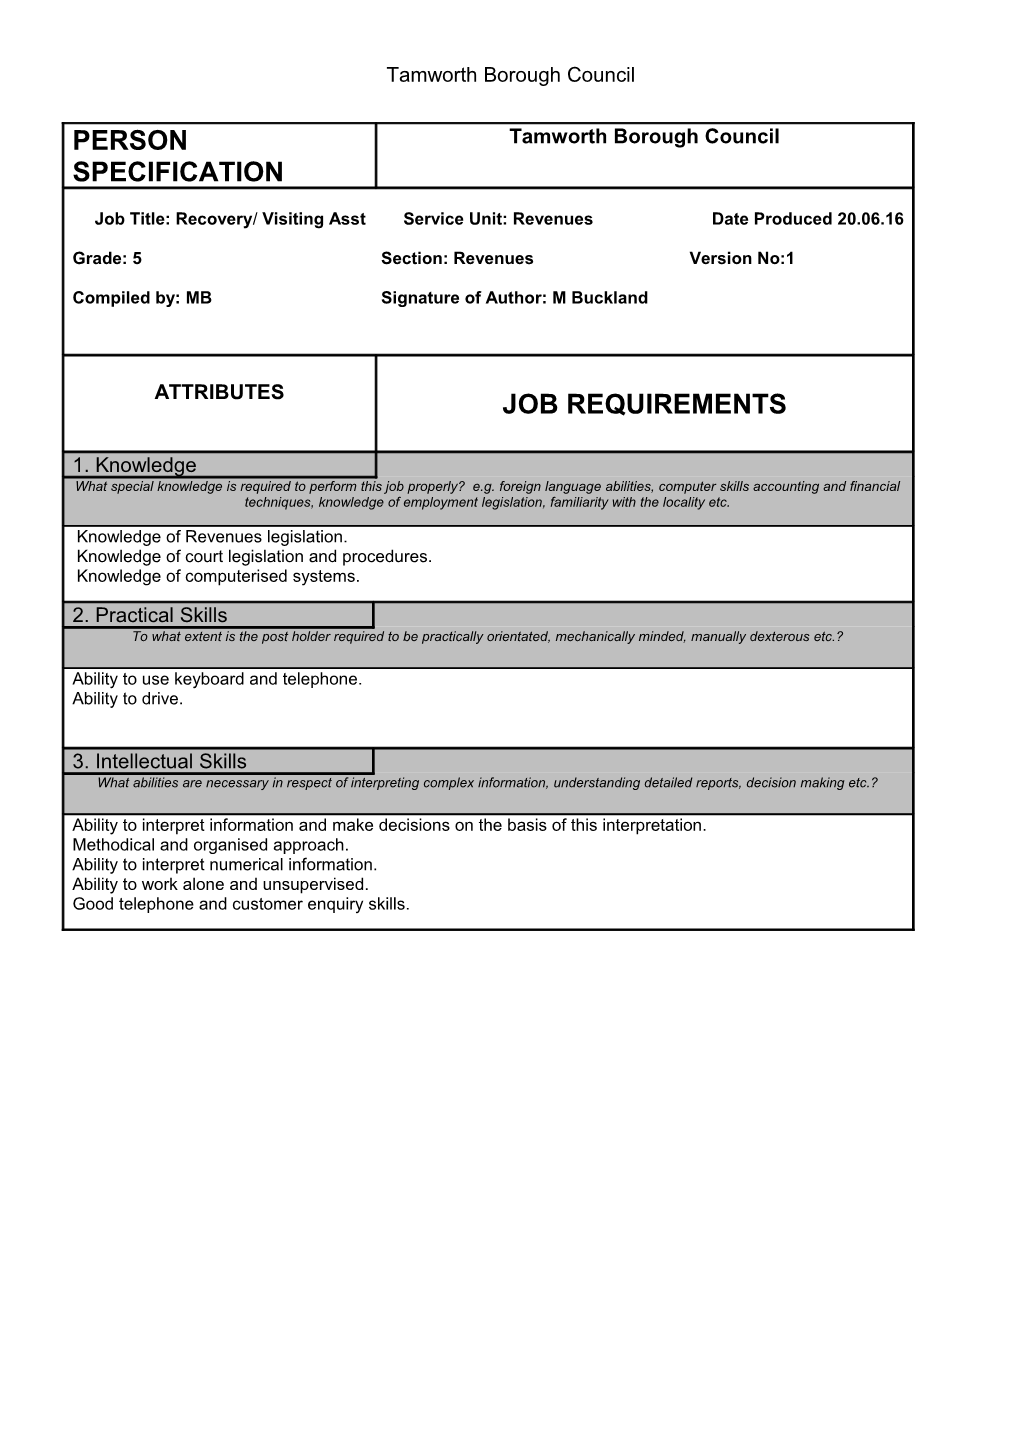 Job Title: Recovery/ Visiting Asst Service Unit: Revenues Date Produced 20.06.16